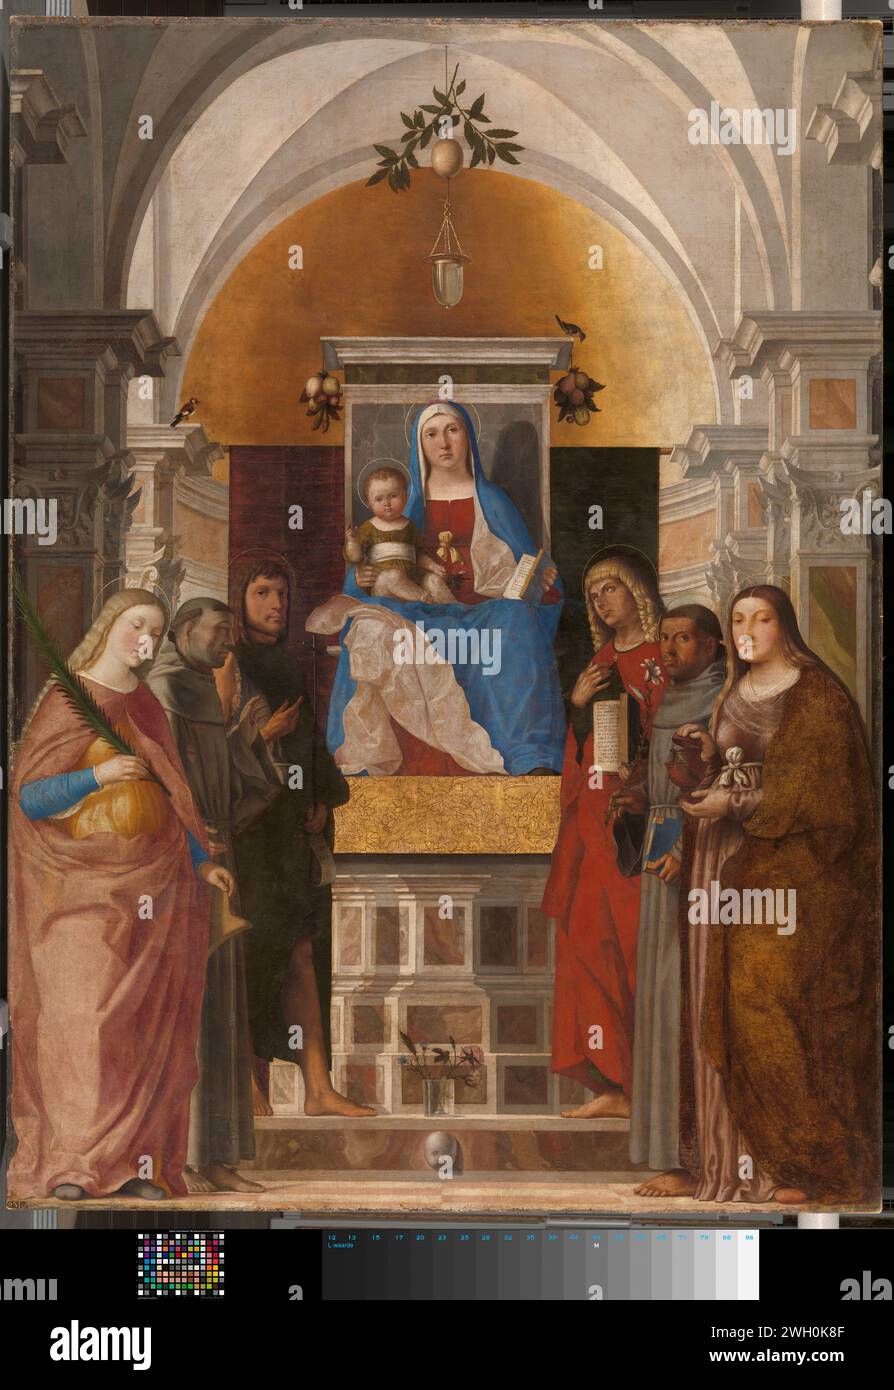 Madonna and Child with Sts Catherine, Francis of Assisi, John the Baptist, John the Evangelist, Antony of Padua and Mary Magdalene, Marcello Fogolino, 1510 - 1520 painting Mary with child and saints. Church interior with Mary in the middle with the Christ child and a book sitting on a raised throne. On the left the saints Catharina, Franciscus and Johannes the Baptist. On the right the Saints Mary Magdalena, Antonius van Padua and John the Evangelist. On the step in front of the throne is a glass vase with a few flowers, on the corners of the throne hang bunches with fruit.  canvas. oil paint Stock Photo